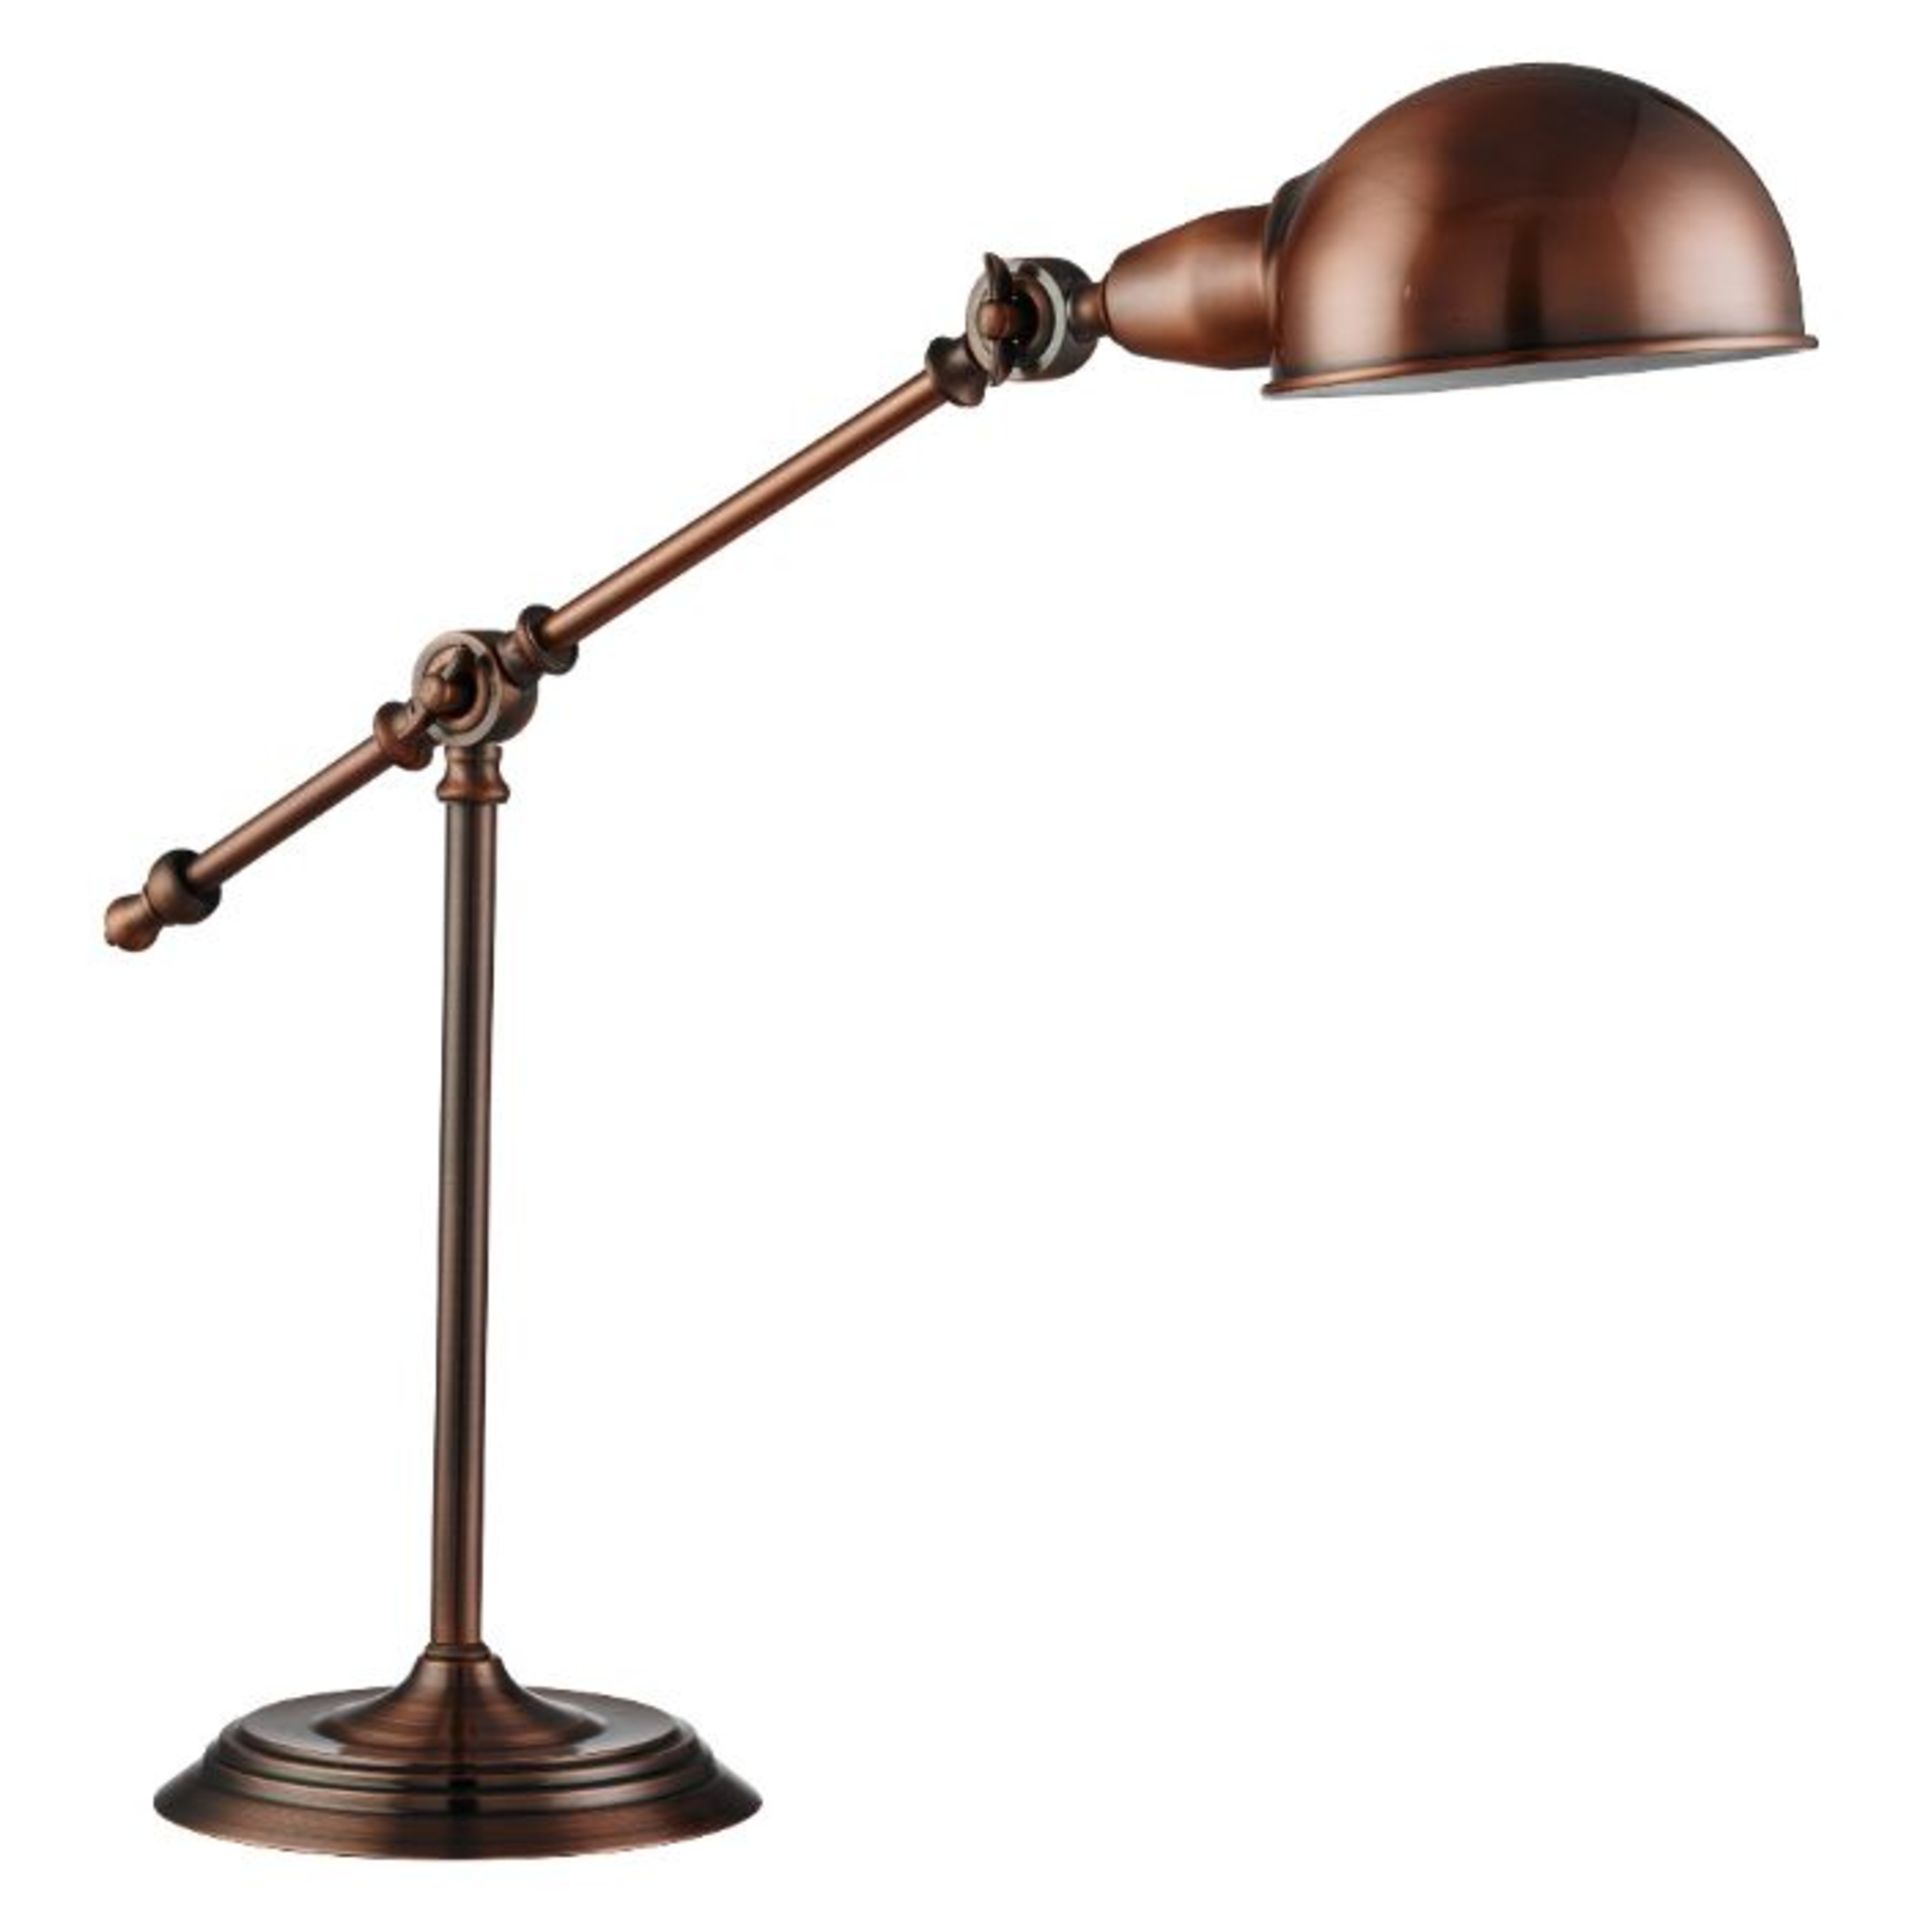 BRAND NEW TABLE LAMP WITH ANTIQUE COPPER FINISH. 35CM HIGH. - Antique copper finish table lamp.